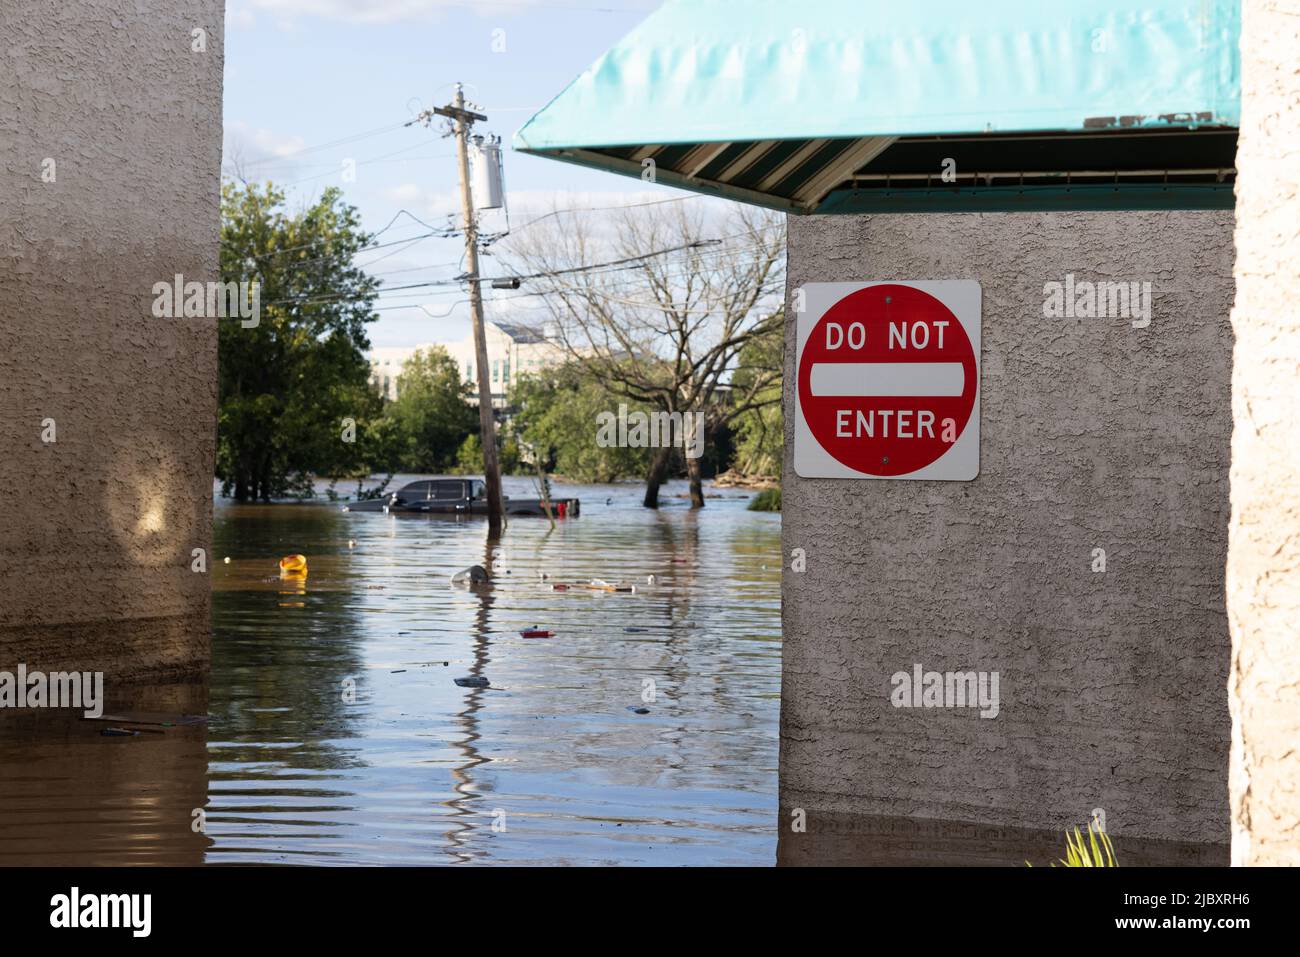 BRIDGEPORT, PA – September 2, 2021: Floodwaters near the Schuylkill River are seen as remnants of Hurricane Ida impacted the Mid-Atlantic region. Stock Photo